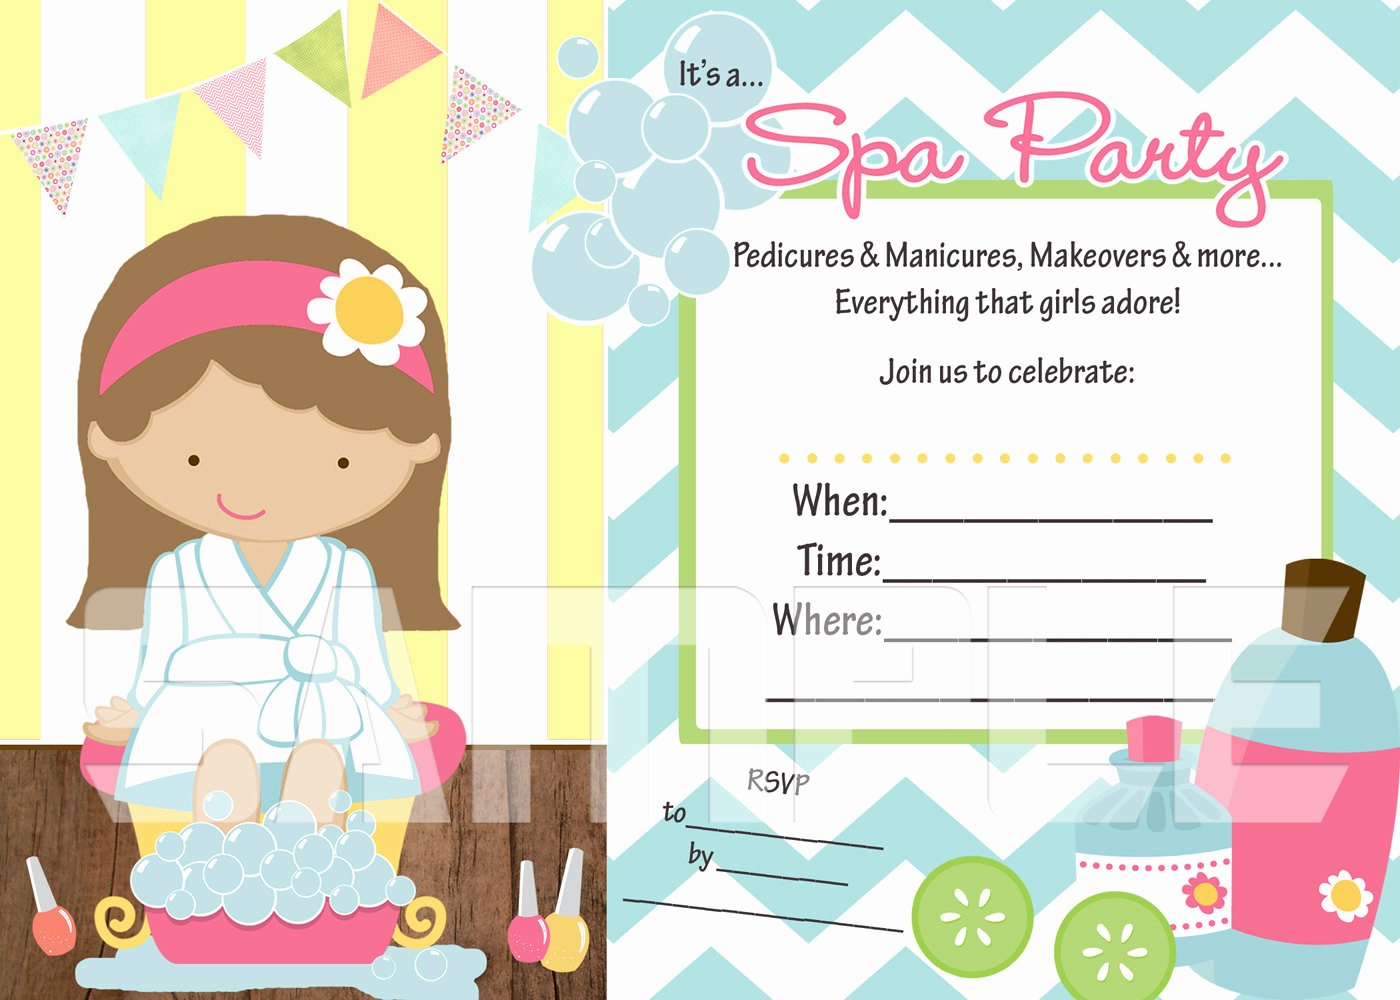 Spa Party Invite Template Beautiful Fill In the Blank Spa Party Printable Invitation by Lilbeansprout